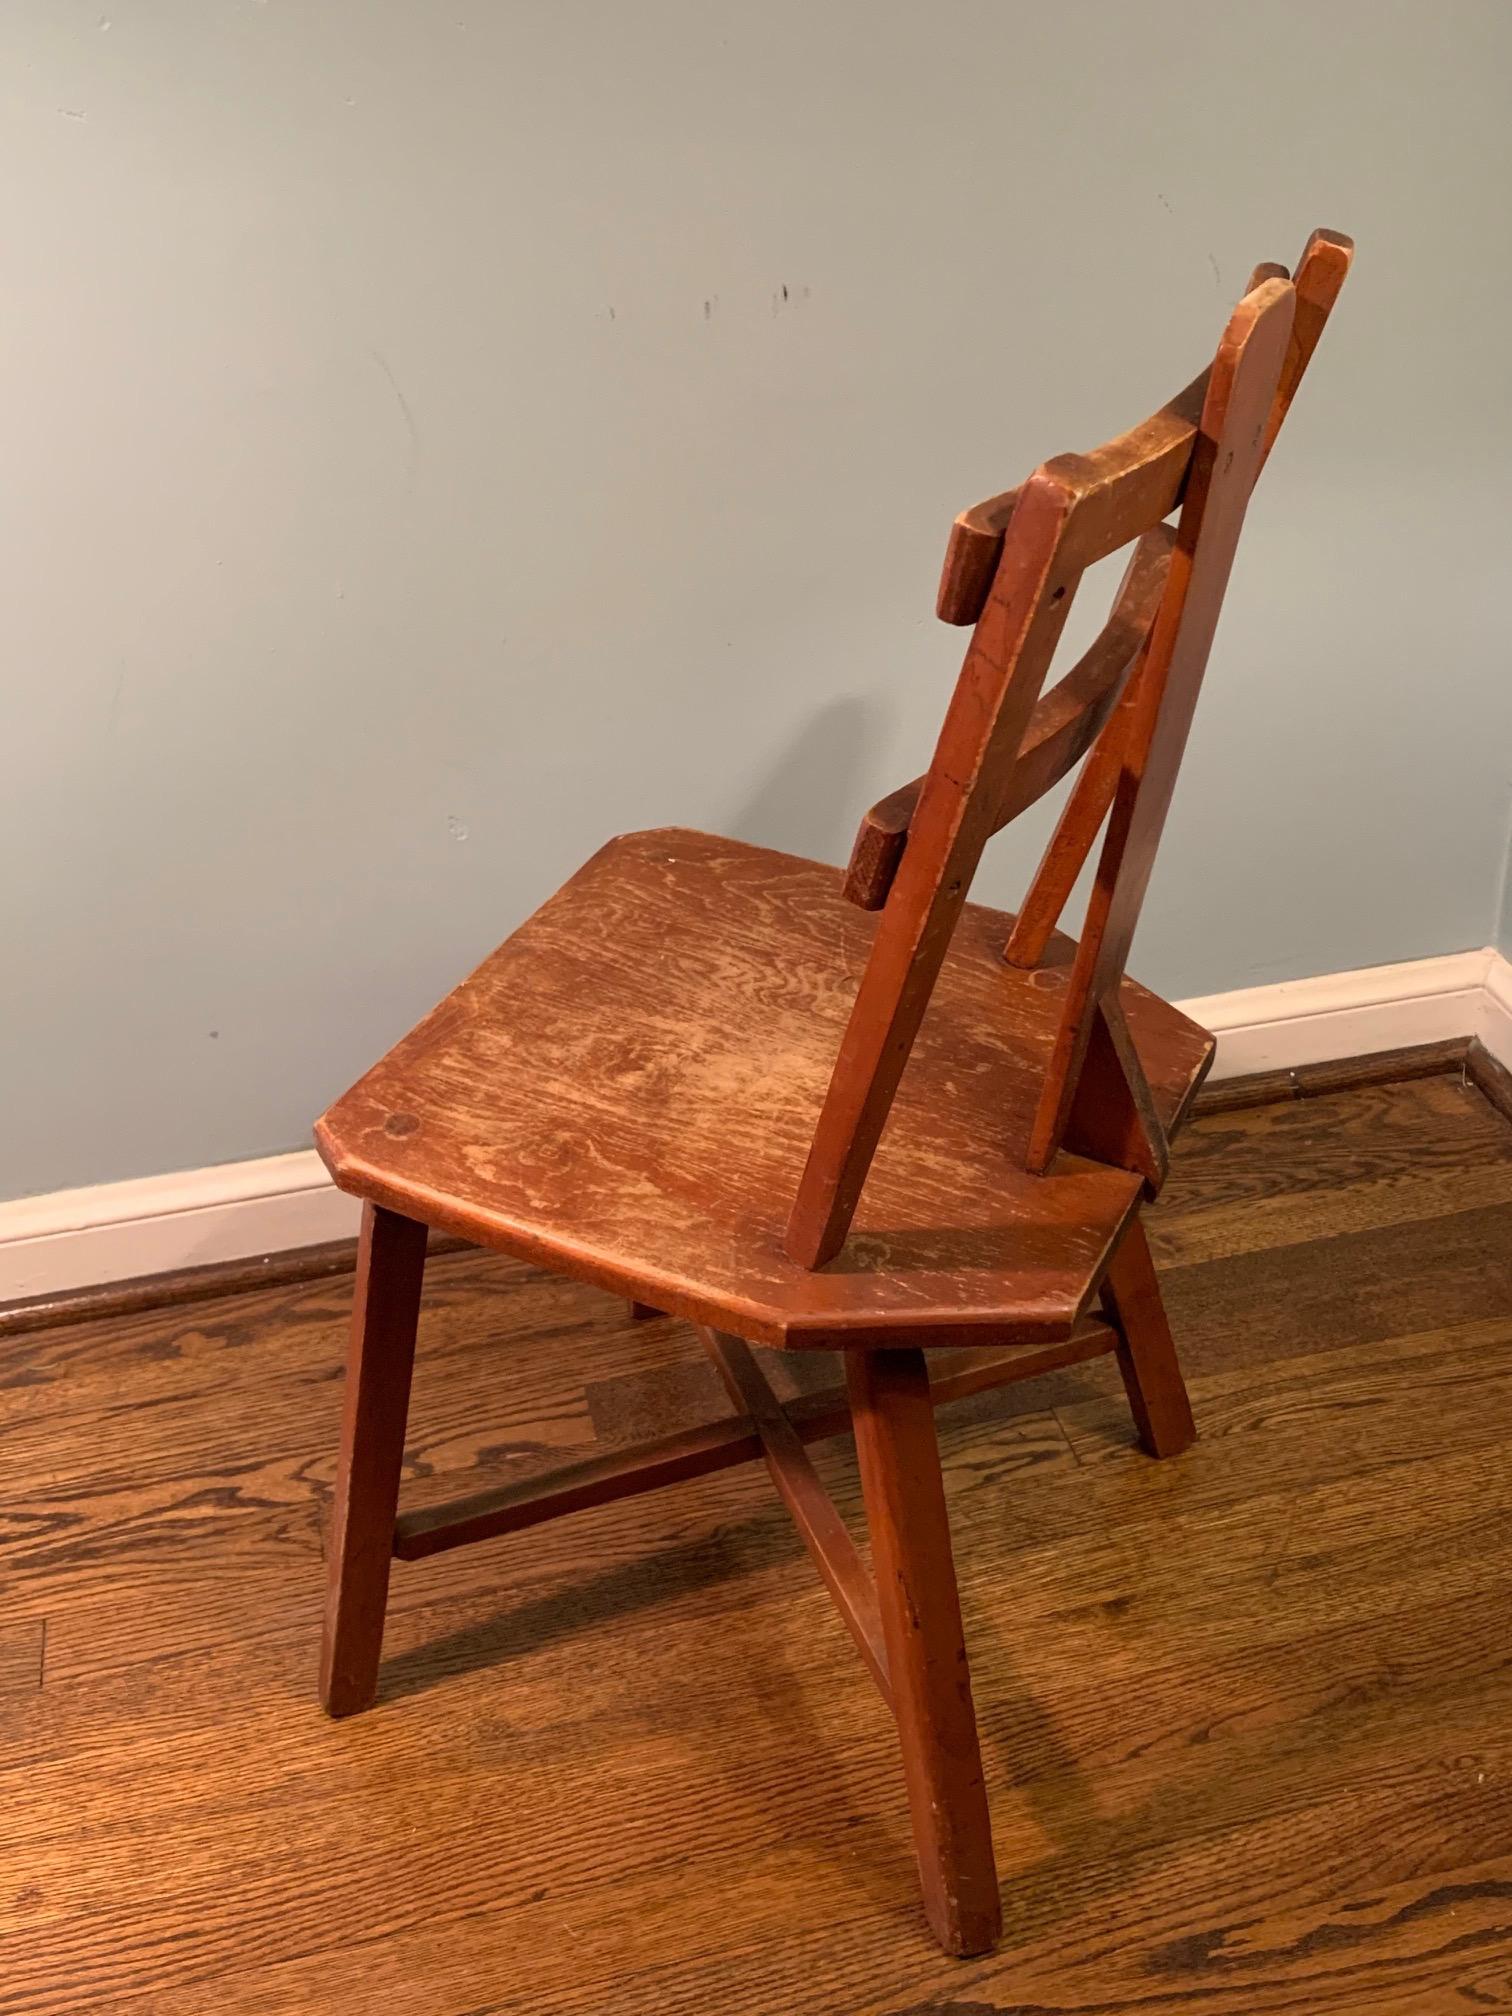 Fabulous pair of primitive cherrywood chairs in worn original finish reminiscent of Jean Touret. Wonderful lines coupled with a sophisticated yet primitive original design. Unmarked. Seat is 16” deep by 15.5” wide. Chair is 33” tall and seat rests